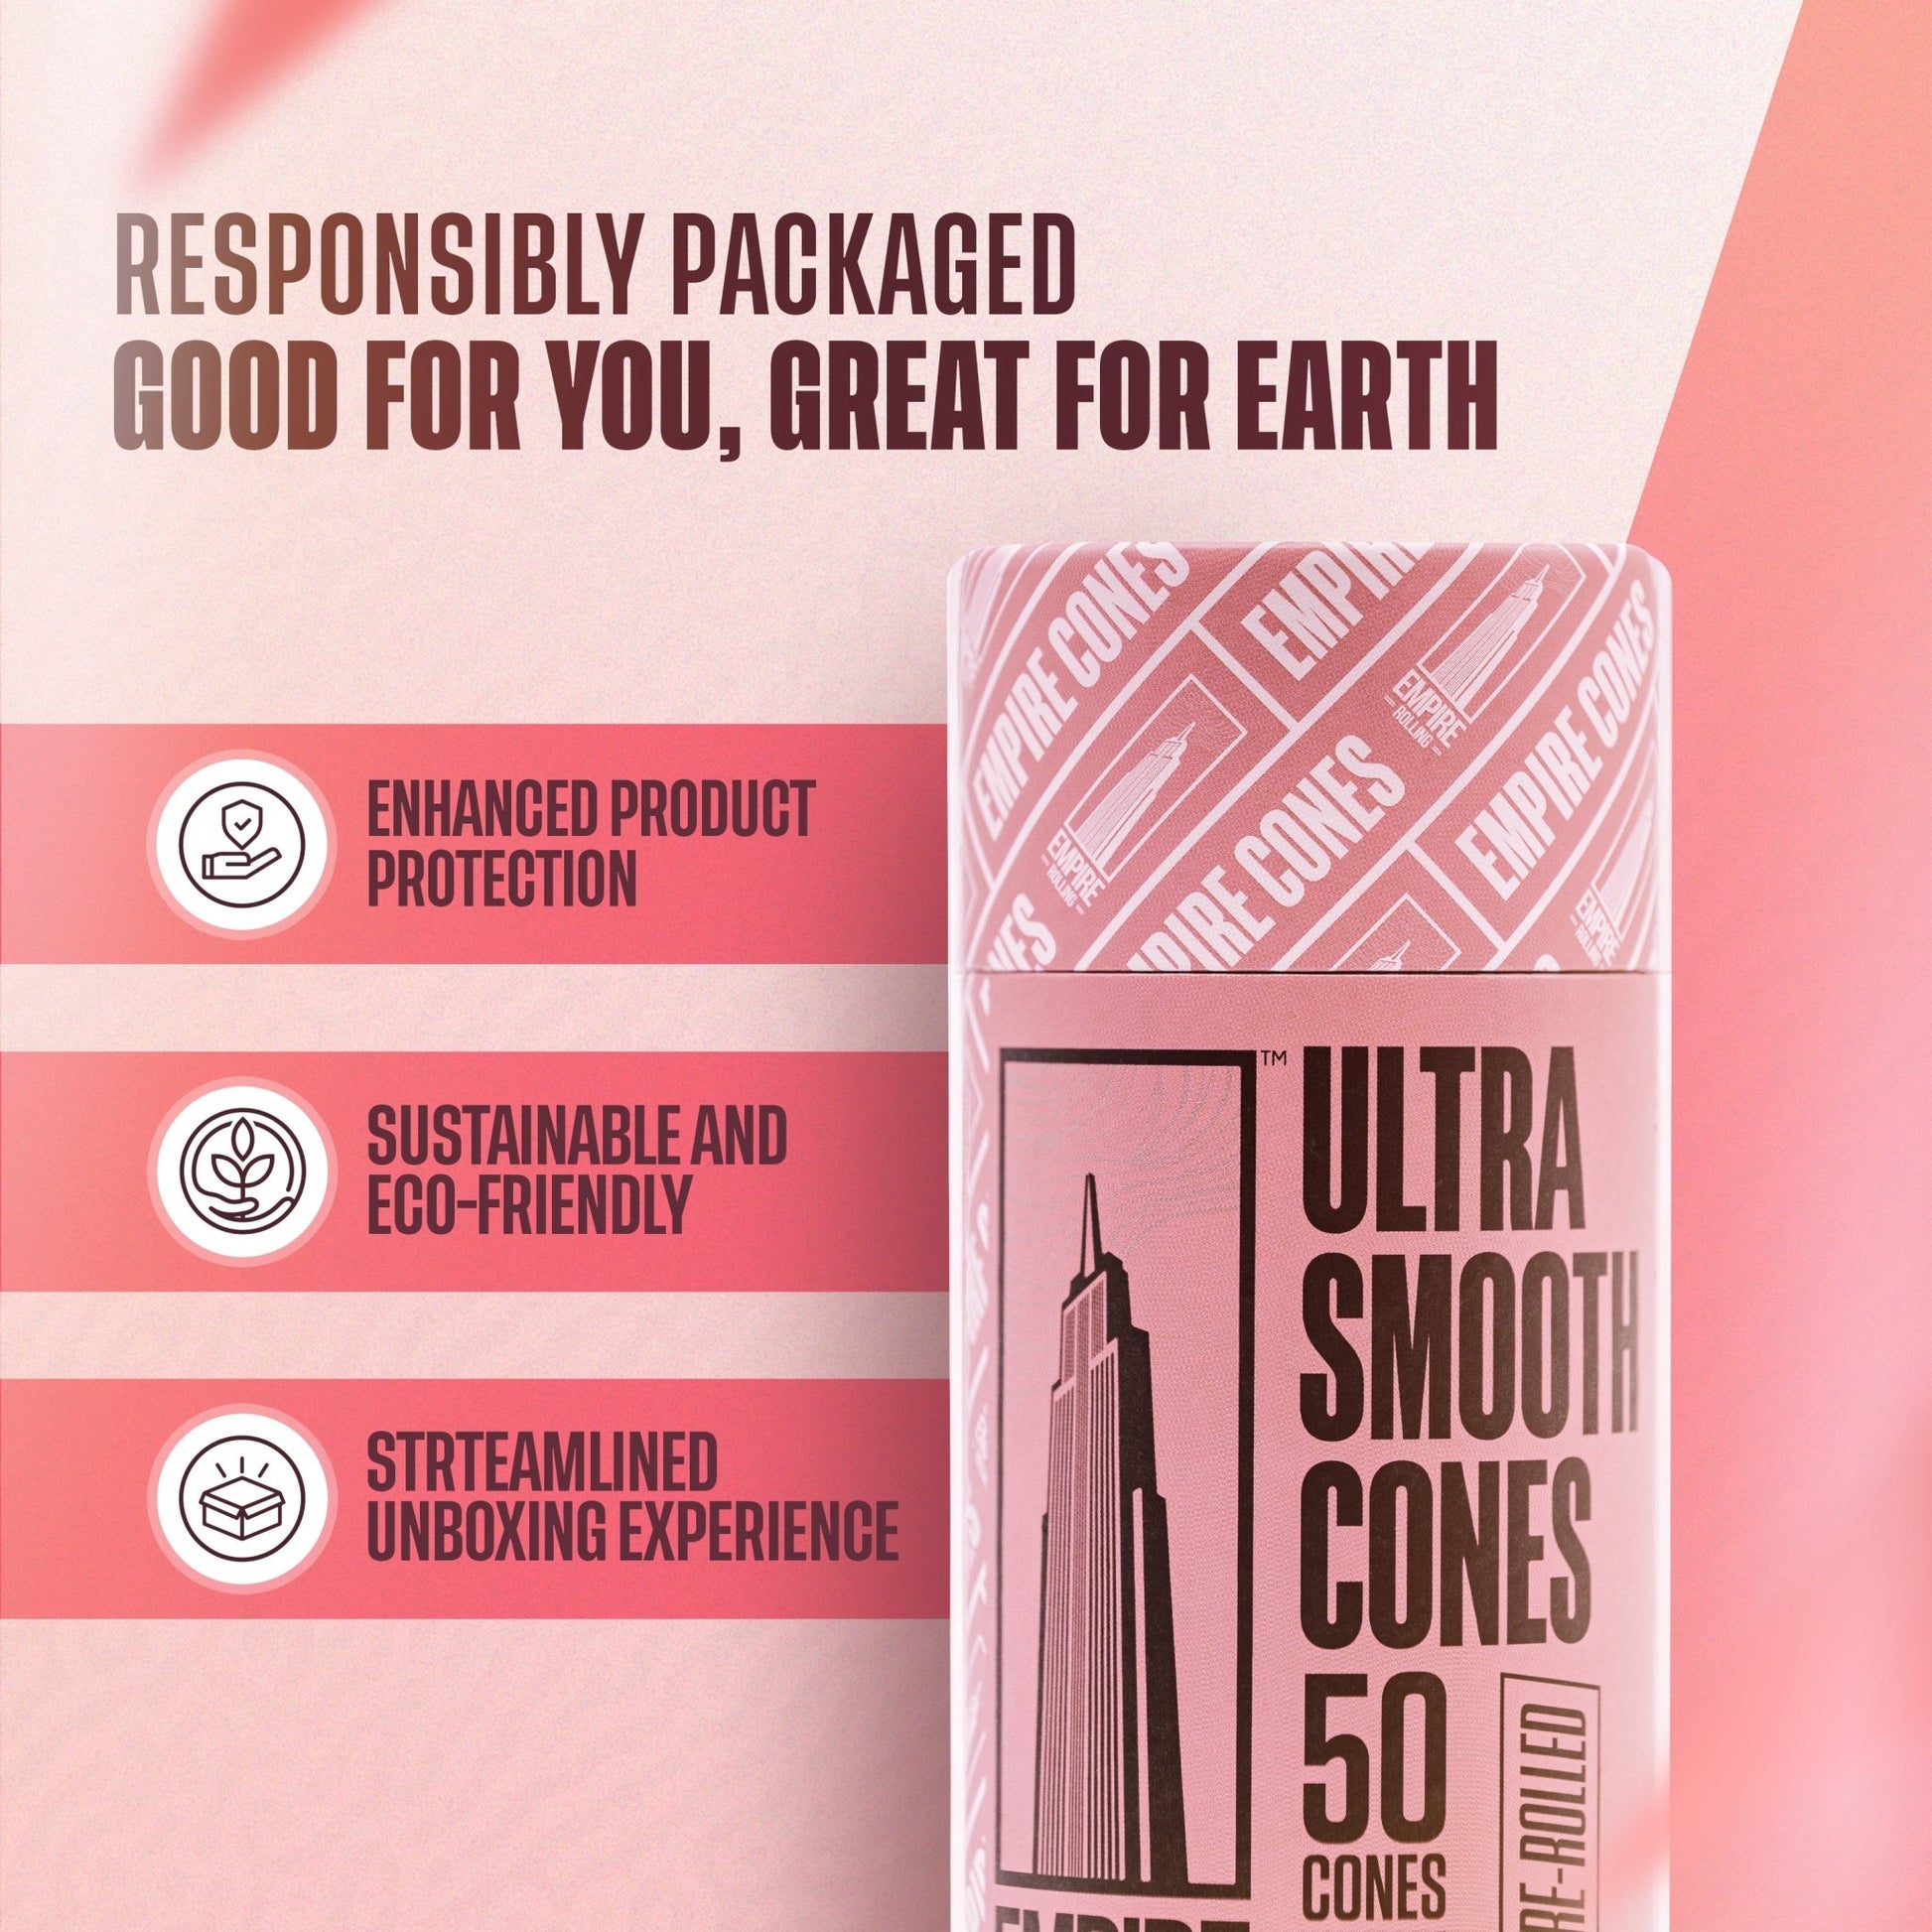 Empire Rolling's King Size Organic Hemp Rolling Papers, eco-friendly and crafted with high-quality, natural materials for a premium smoking experience.Ultra Smooth Pink Cones 50 Count - Empire Rolling Papers